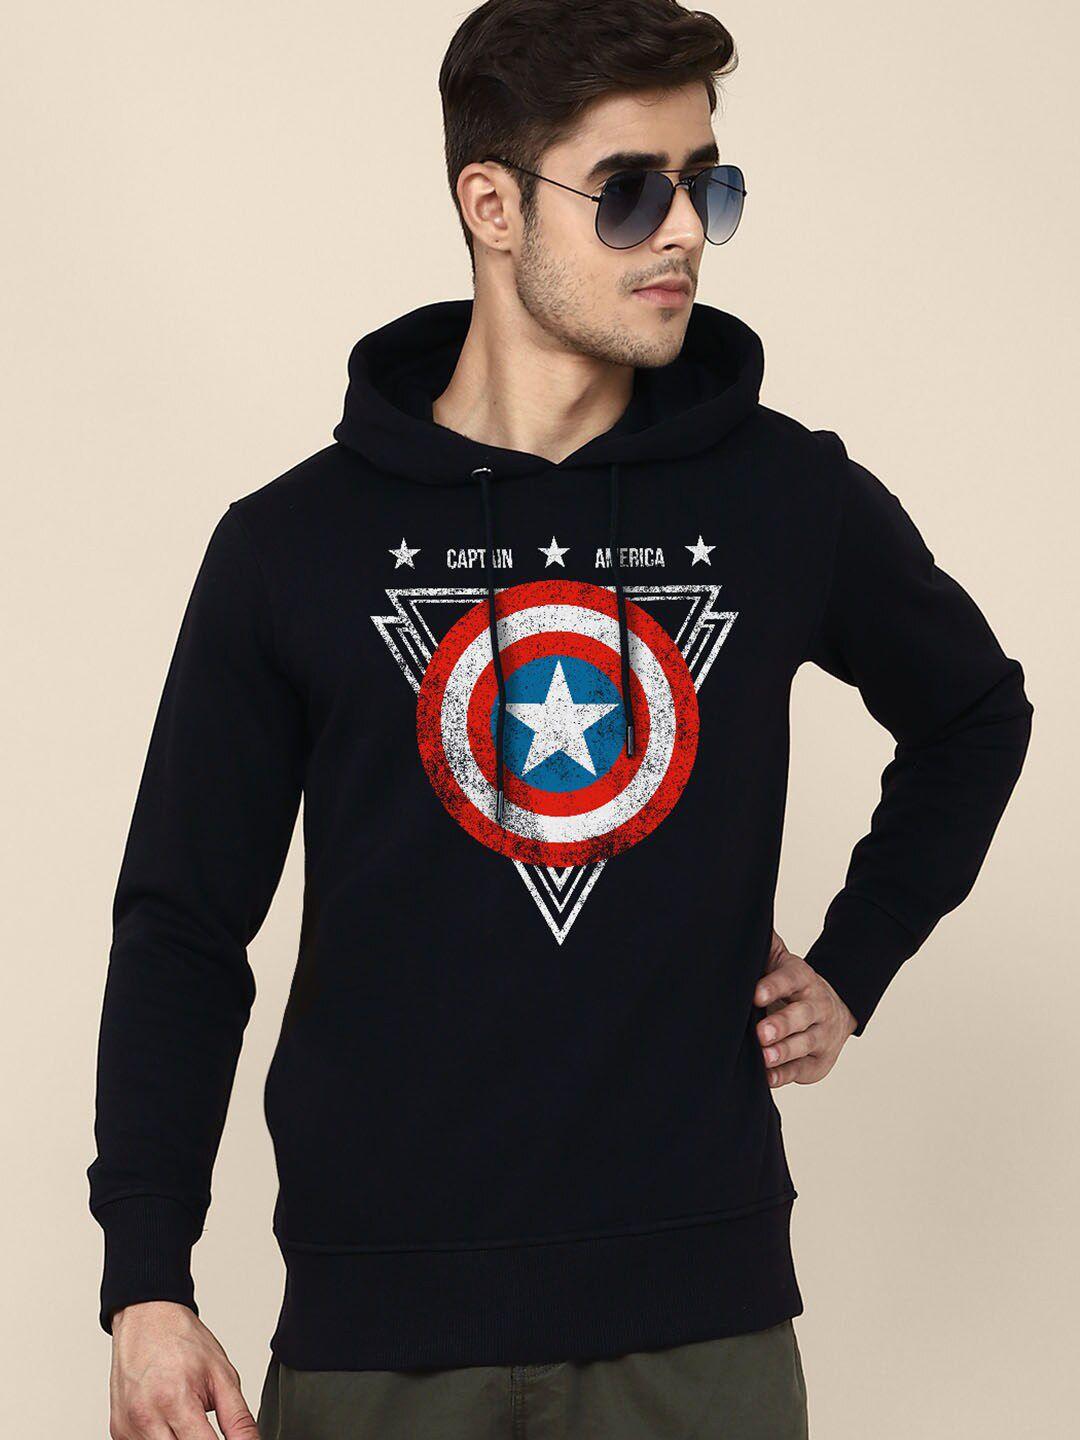 free authority young captain america graphic printed cotton pullover